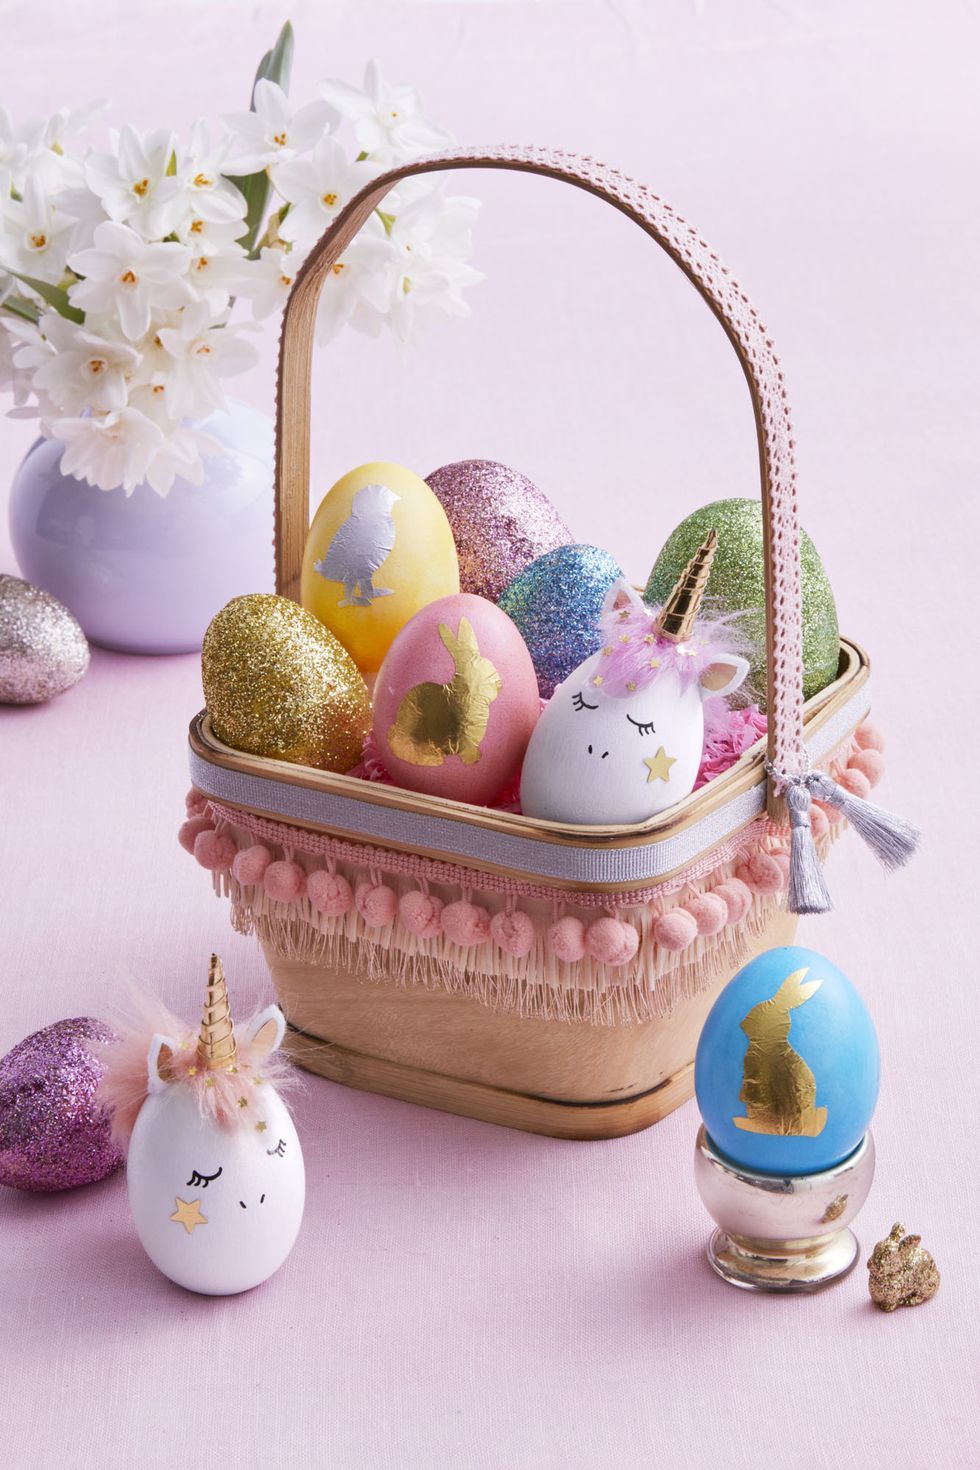 55 Easy Easter Egg Designs - How to Decorate an Easter Egg